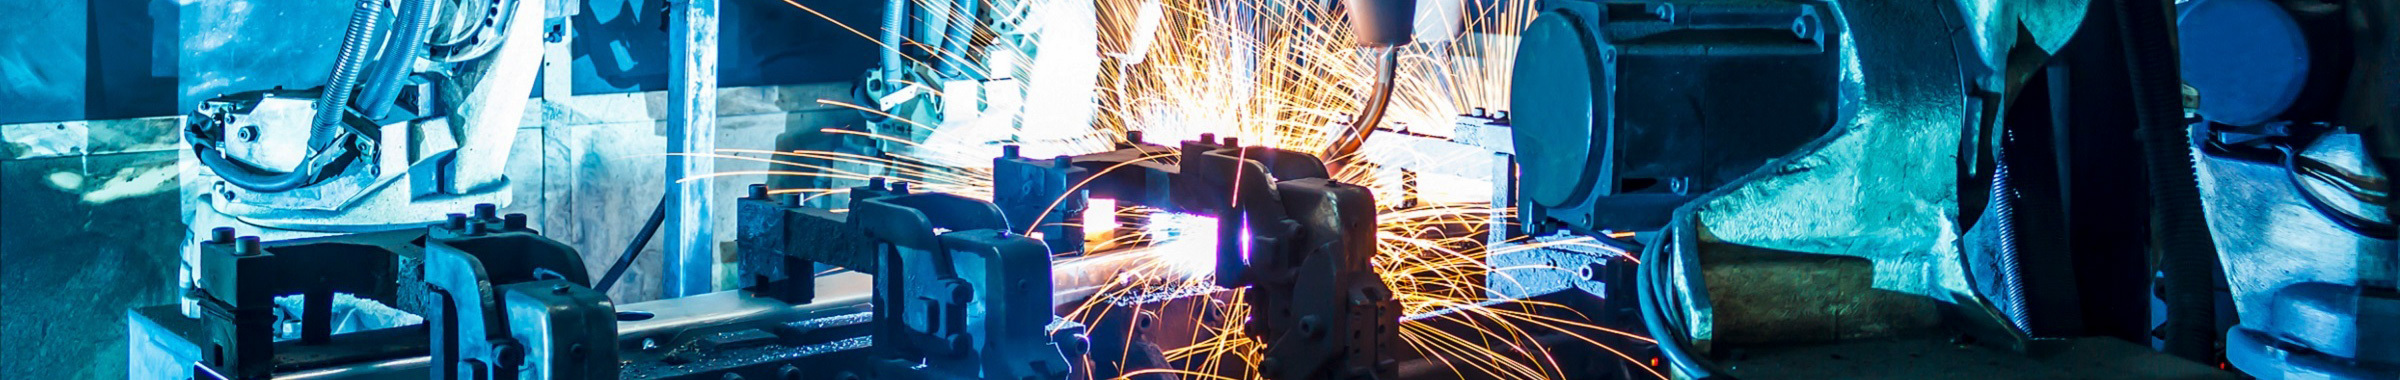 Industrial Worker Using Angle Grinder and Cutting a Metal Tube